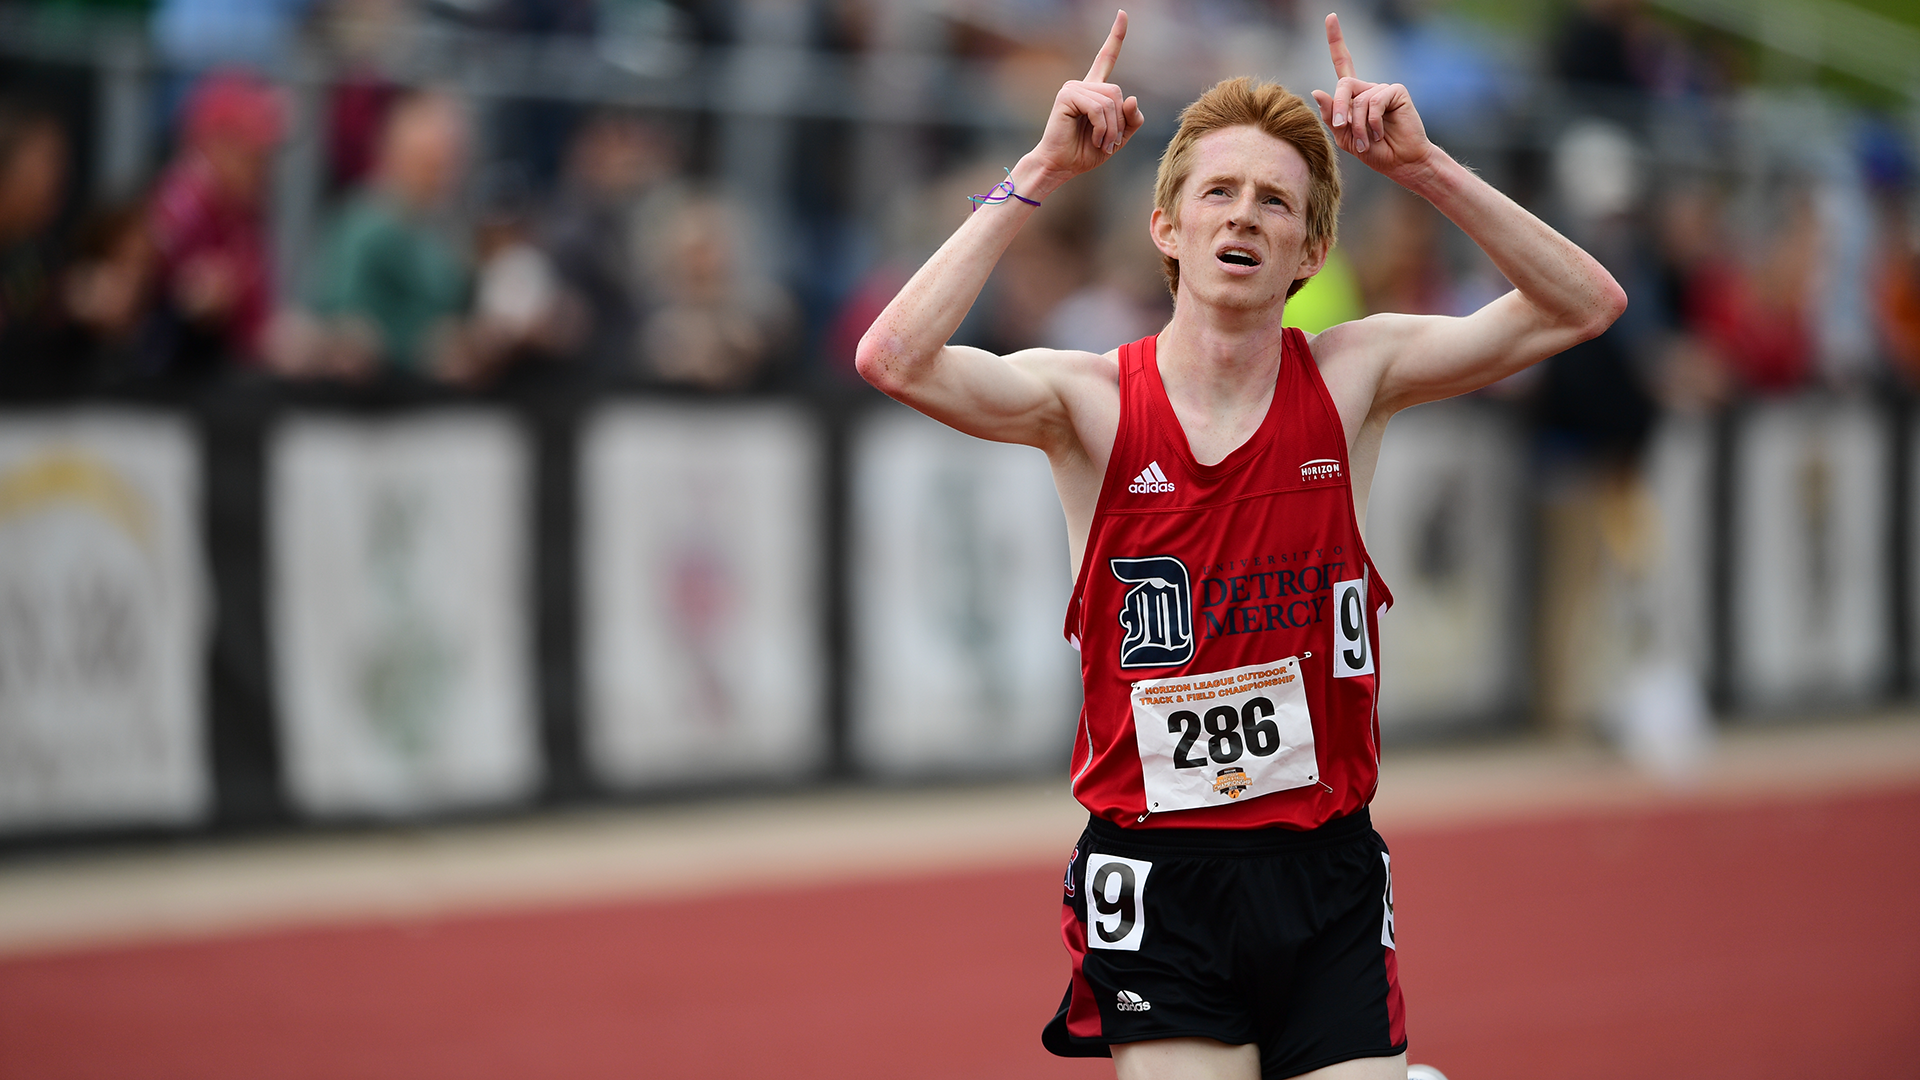 Ben Kendell points to the sky after winning a race outdoors, wearing a red University of Detroit Mercy racing big with numbers on his jersey reading 9 and 286. Logos on his jersey read University of Detroit Mercy and Adidas.